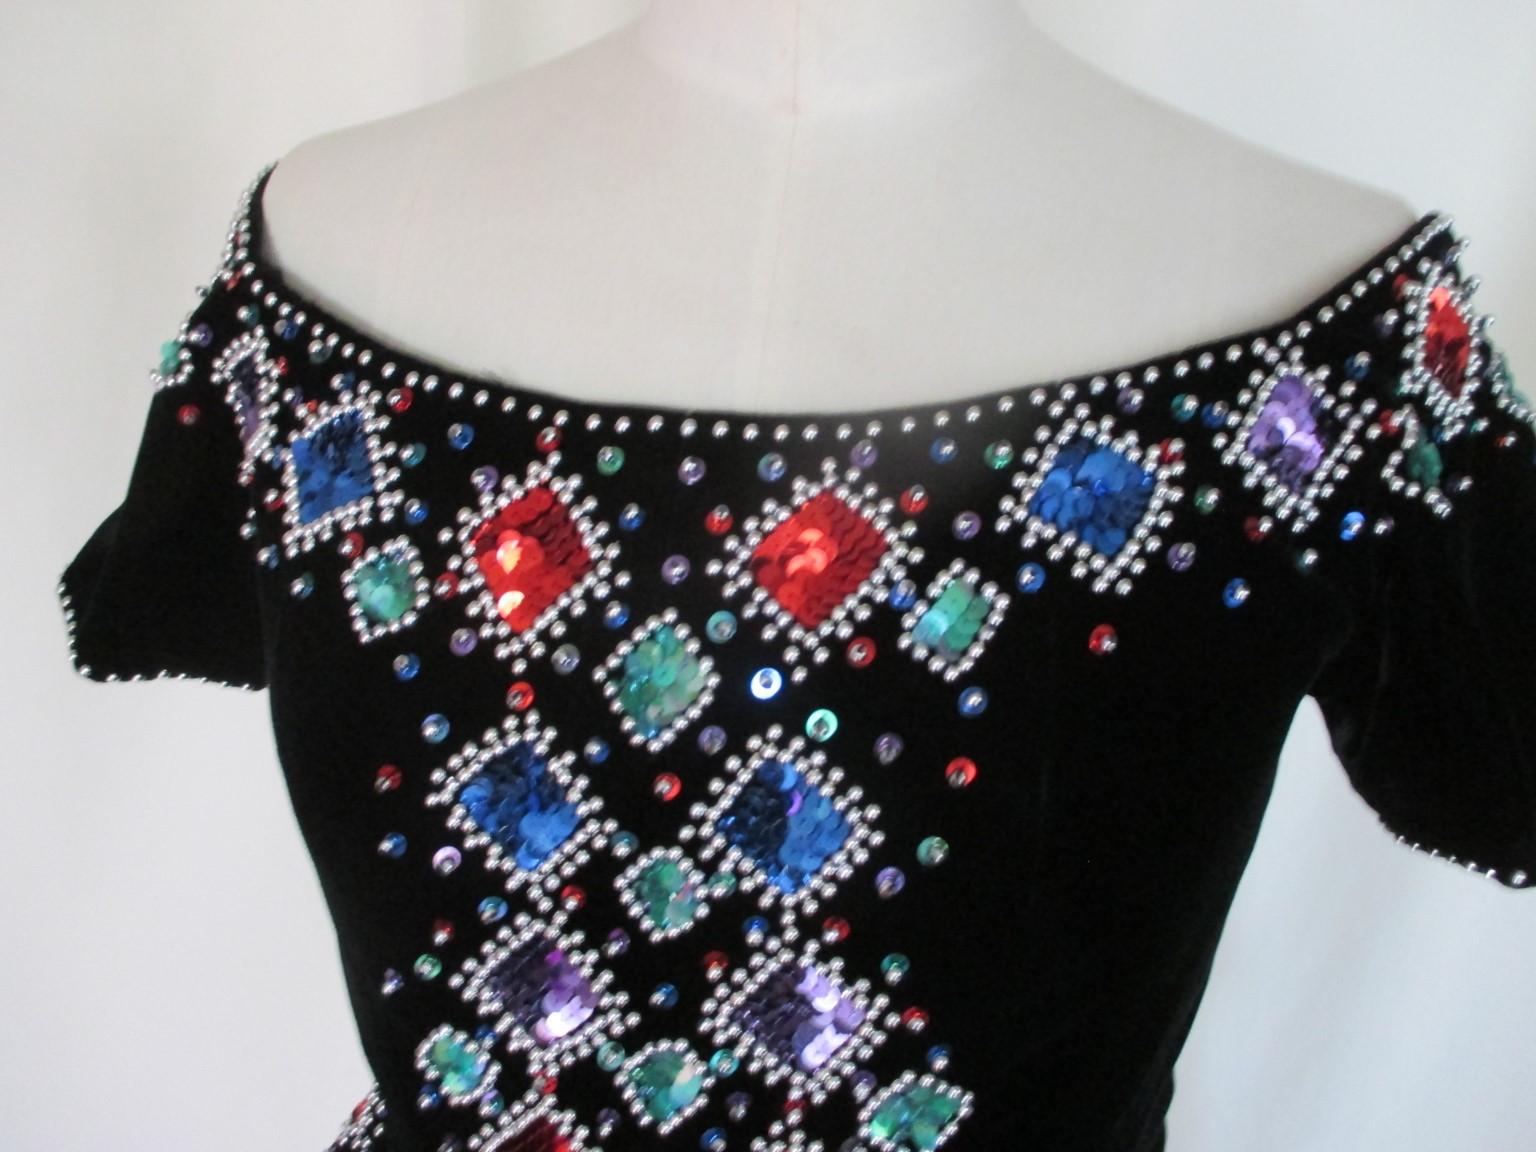 We offer more special vintage items, view our frontstore

Details:
Black velvet top with beautiful color Seguin's with silvertone stones
Lined with 2 inside shoulder straps
Zipper at the back
Size about small , please check measurements

Please note